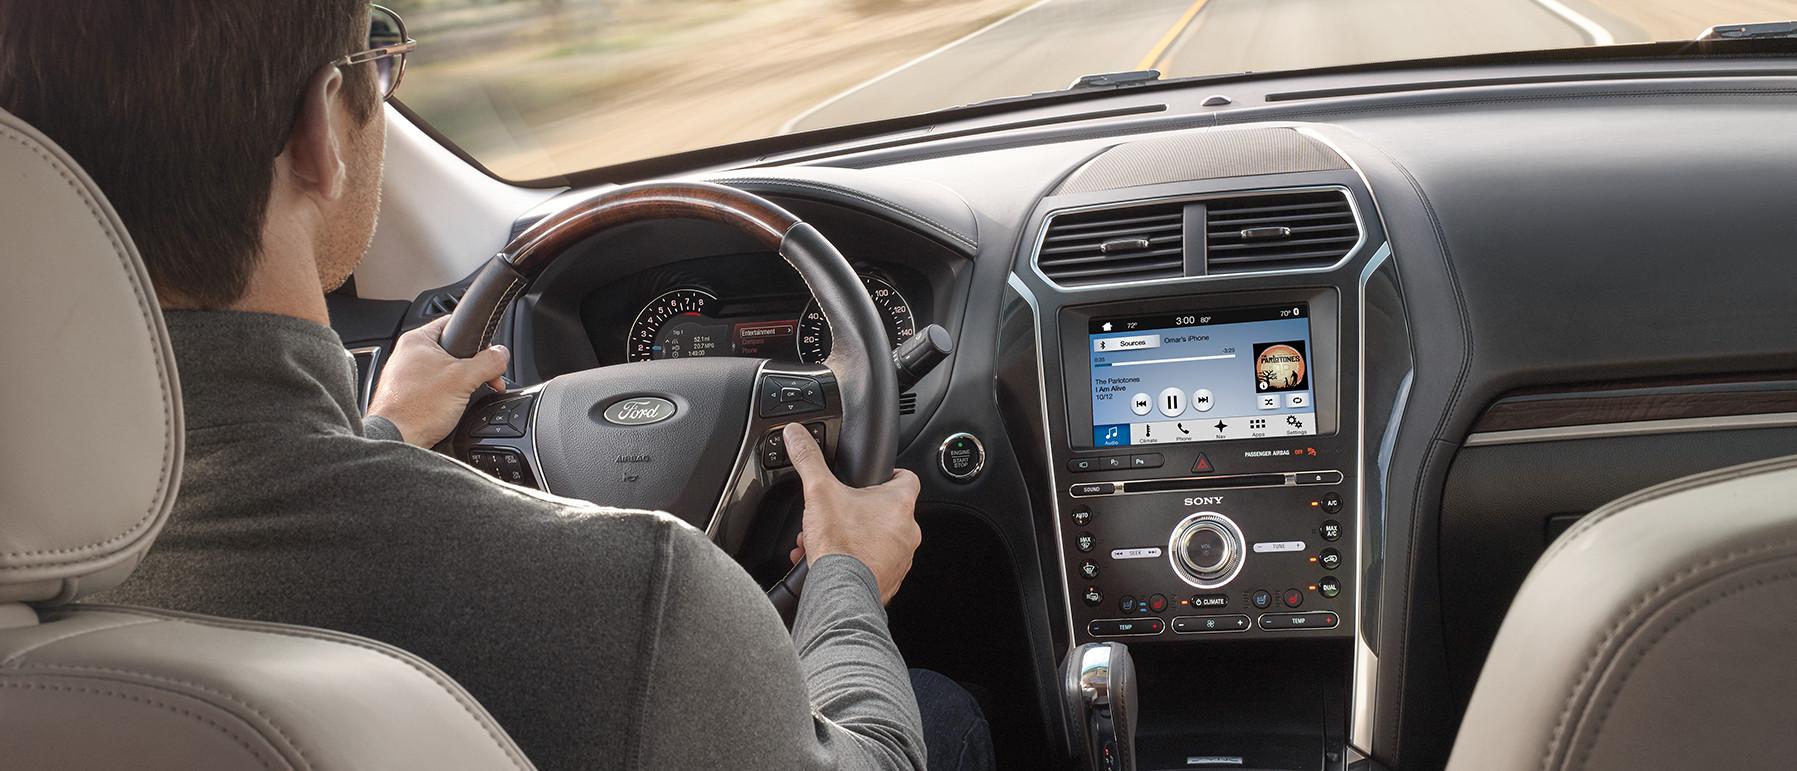 2018 Ford Explorer interior with man driving vehicle